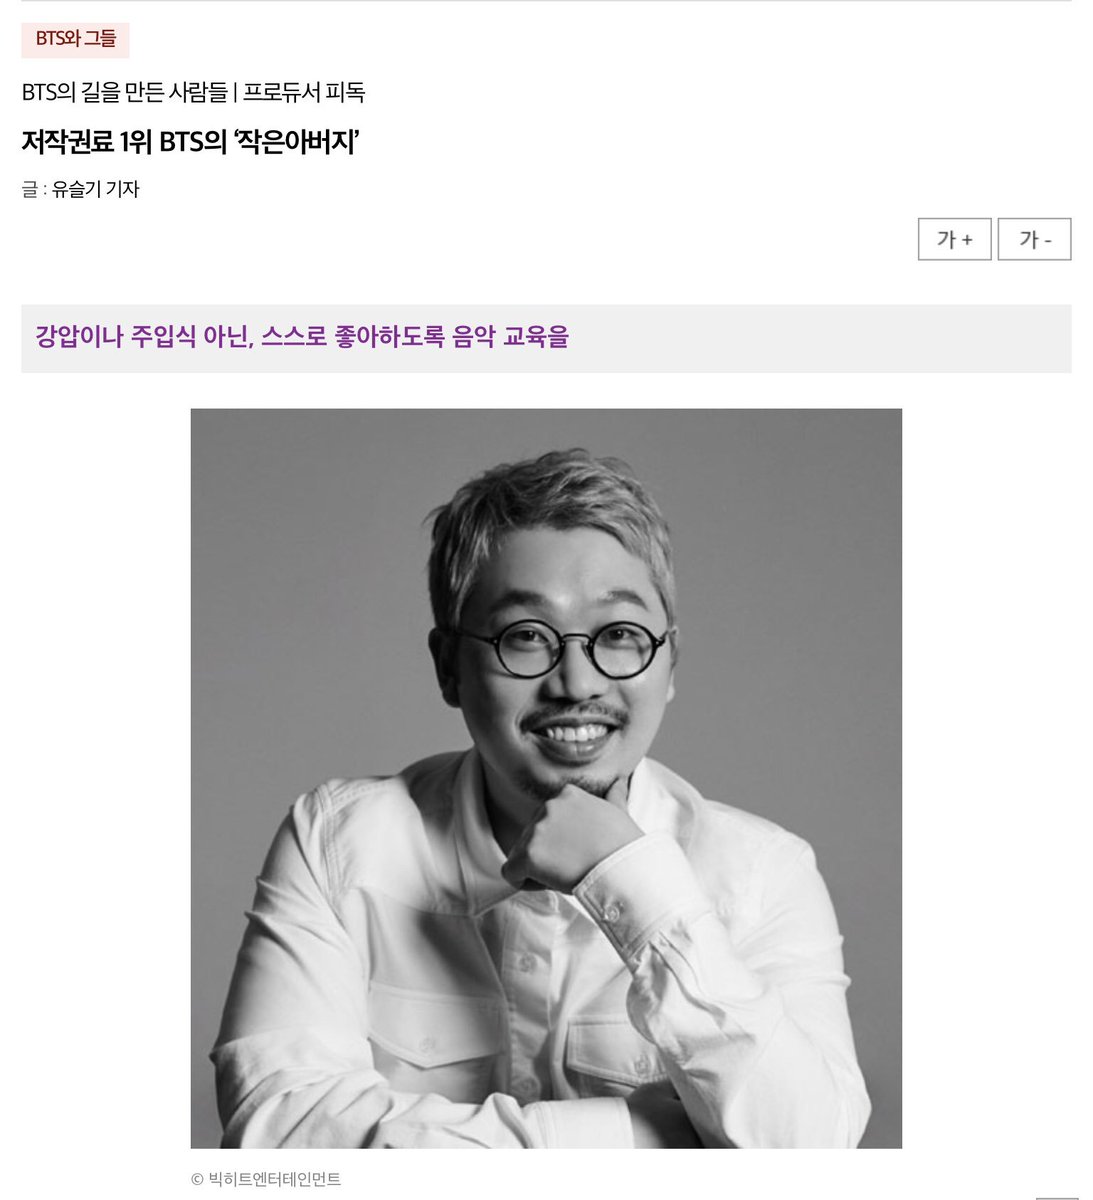 Here’s the article on P-dogg. (Their classes before their debut must have been so interesting).  @BTS_twt  #BTS  #방탄소년단  http://topclass.chosun.com/mobile/board/view.asp?catecode=R&tnu=201906100010